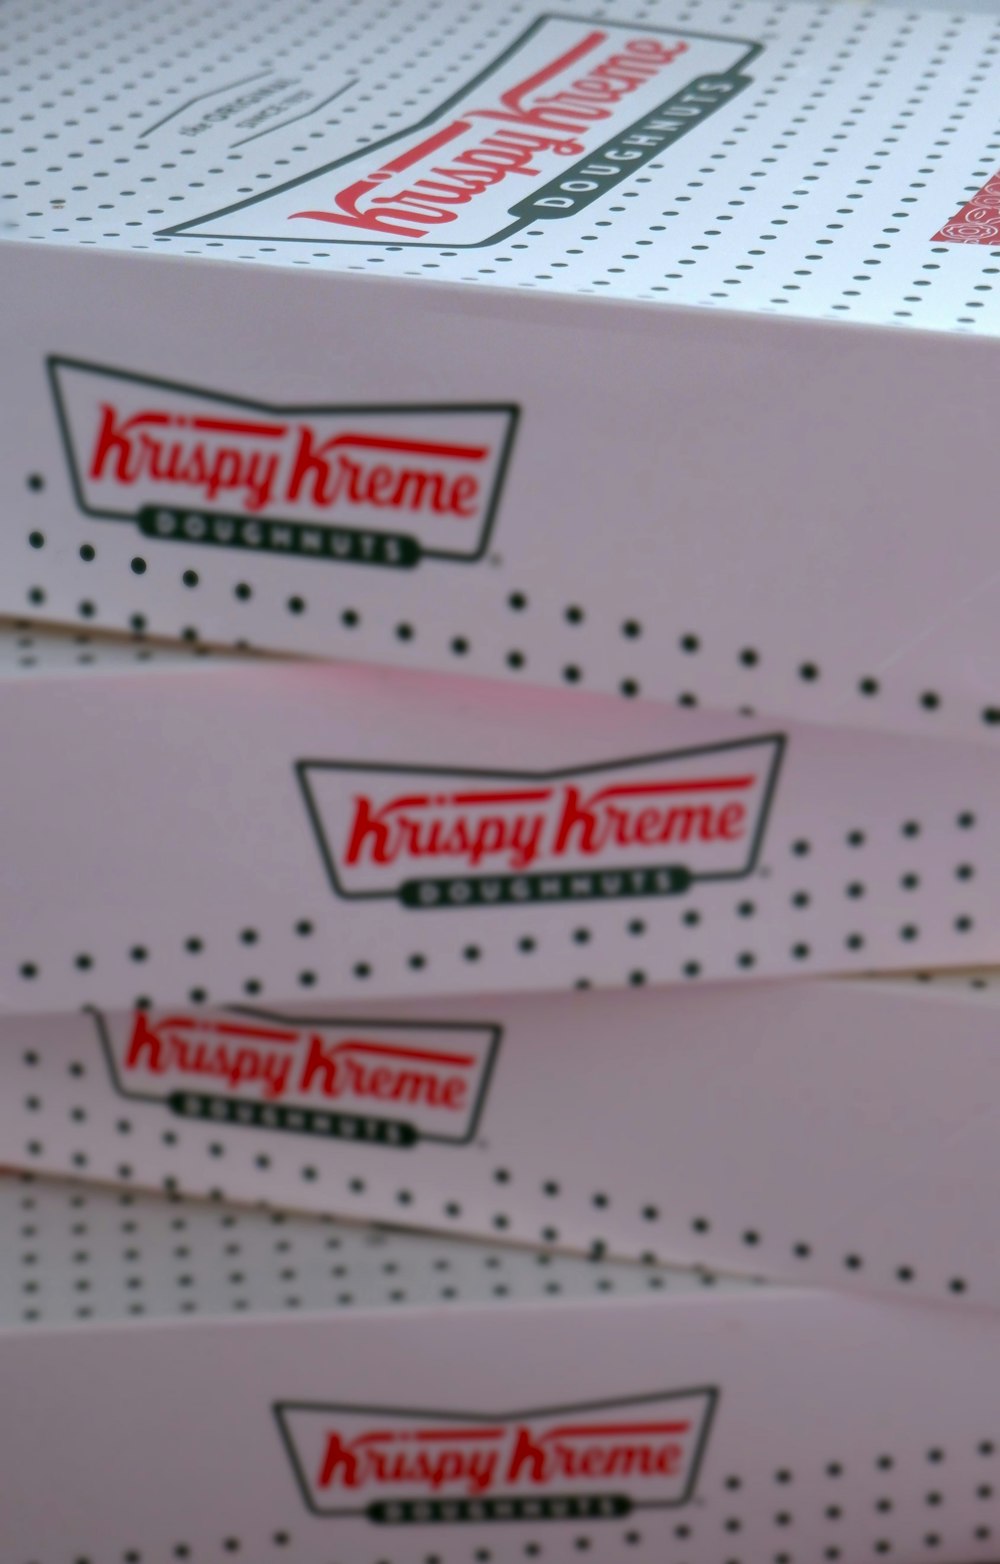 three boxes of krispy kreme are stacked on top of each other